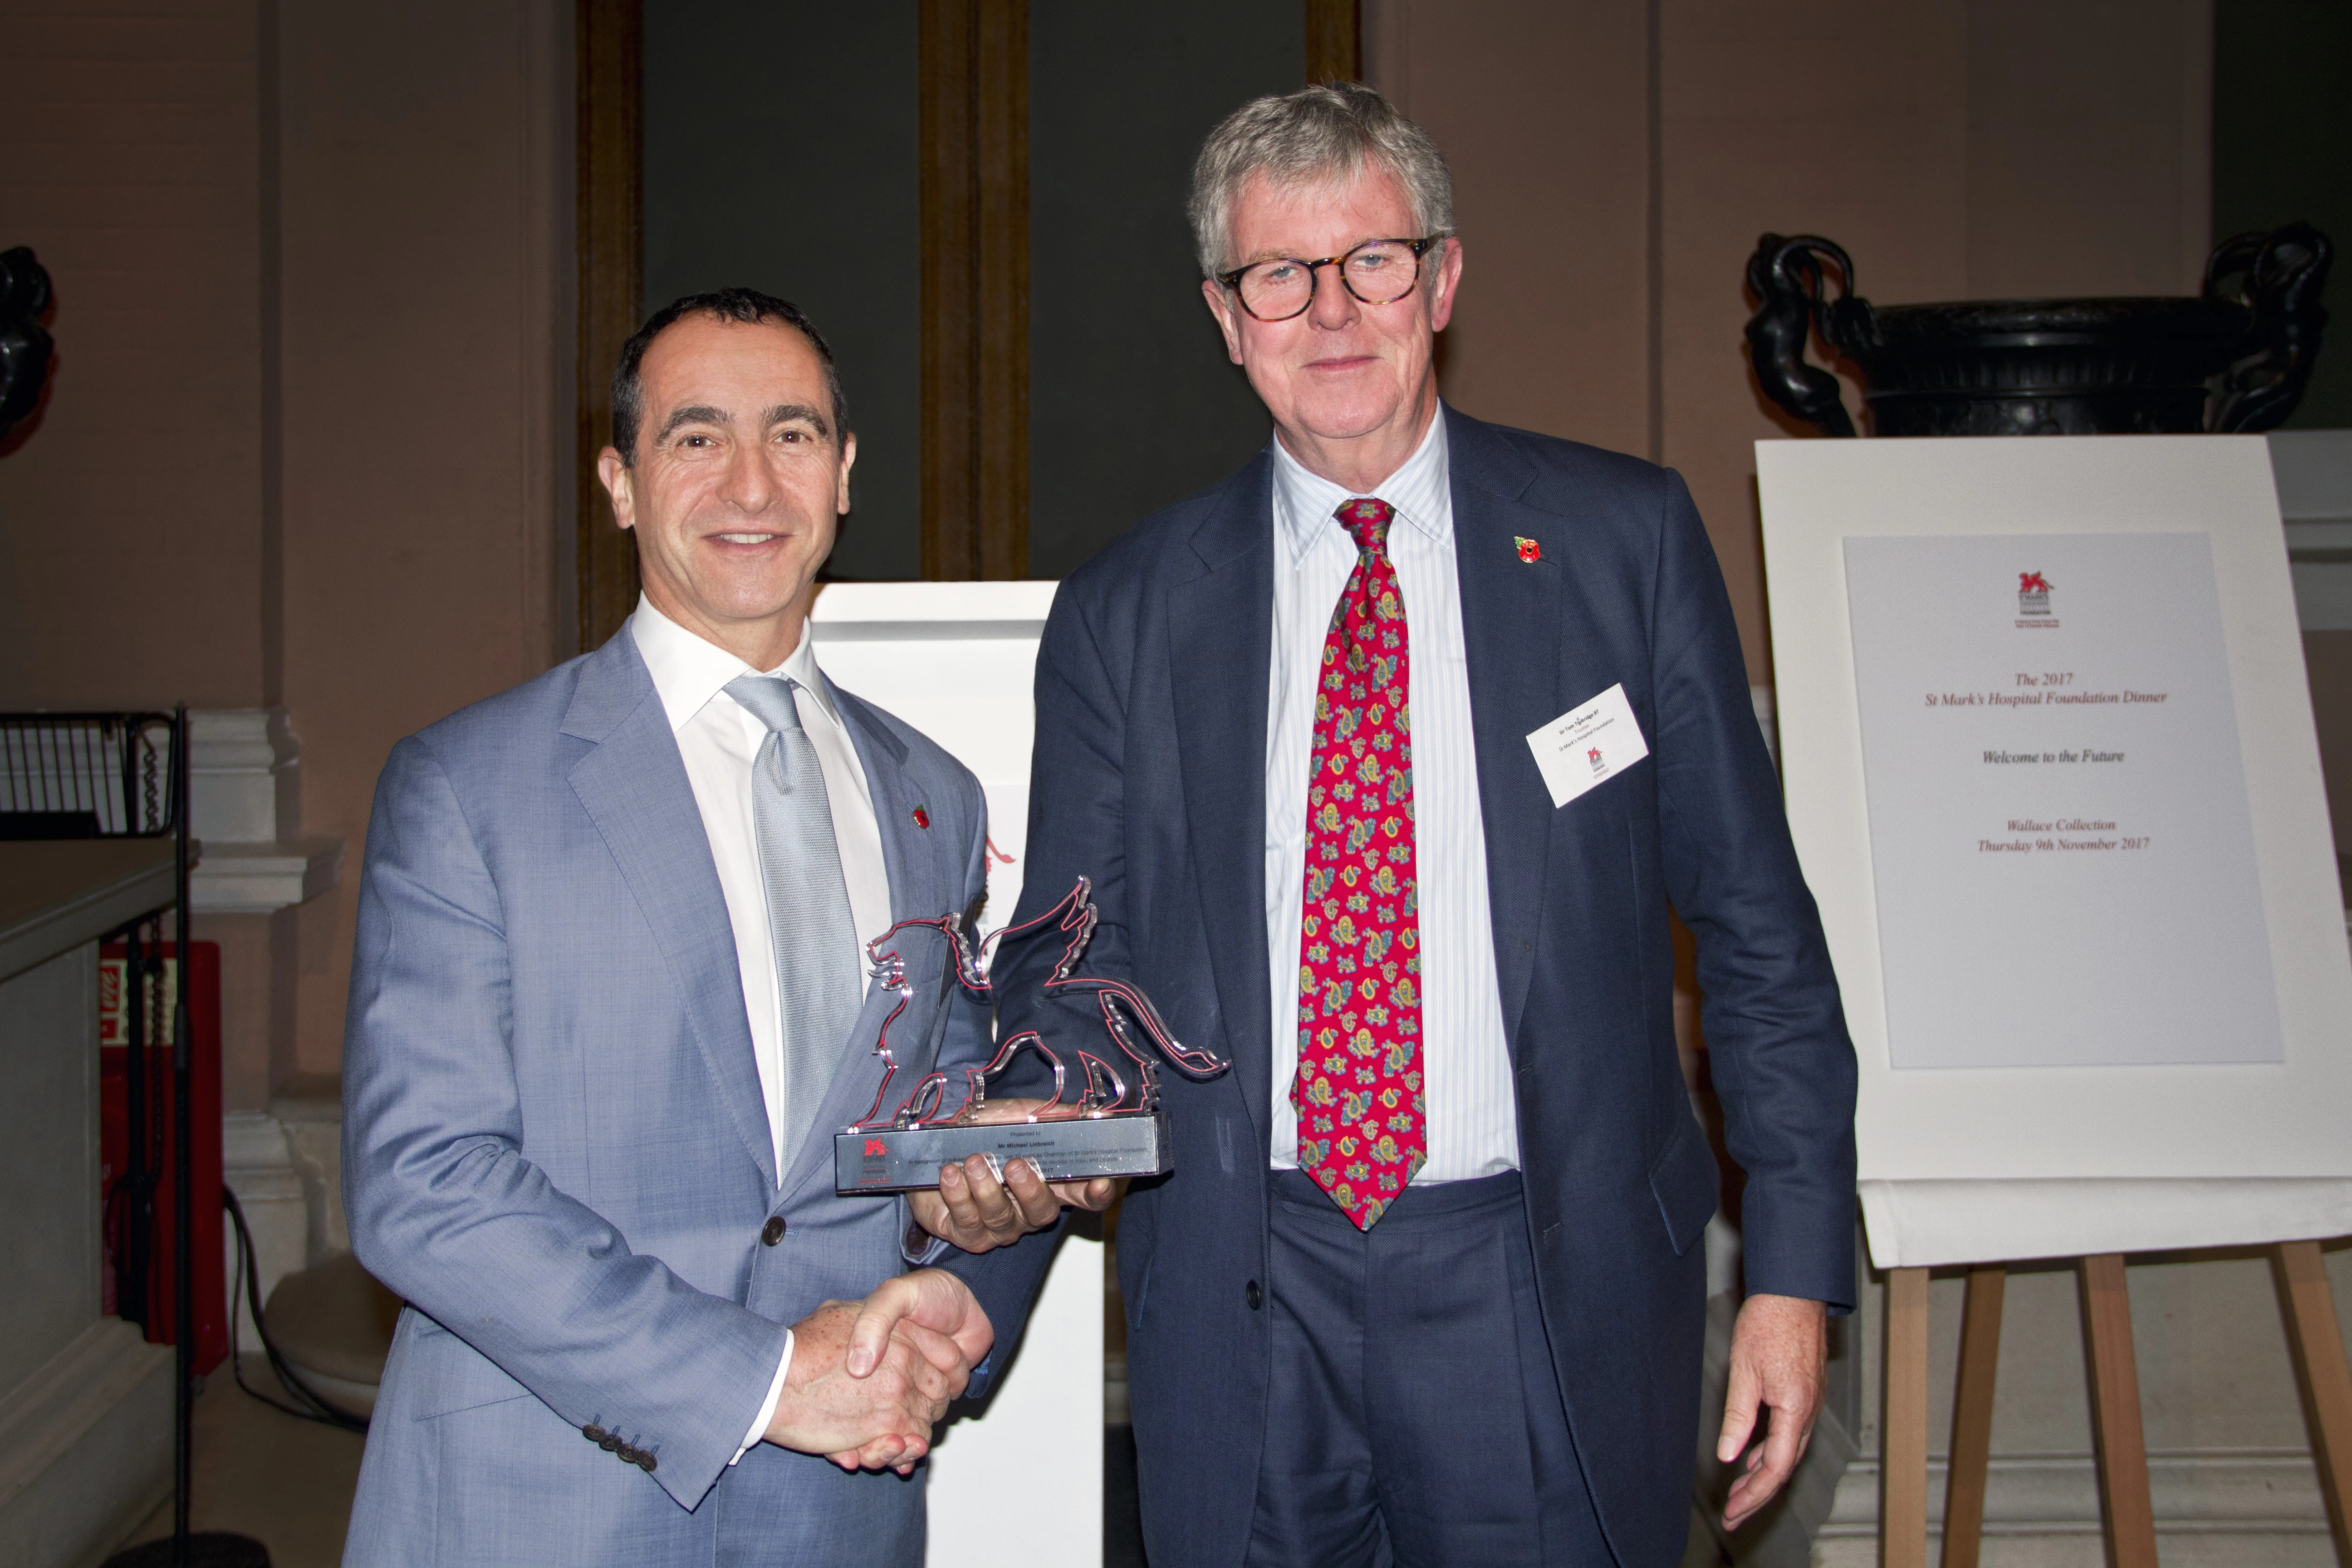 Michael Liebreich (left), outgoing Chair of St Mark’s Hospital Foundation, with Sir Tom Troubridge, the incoming Chair (right)